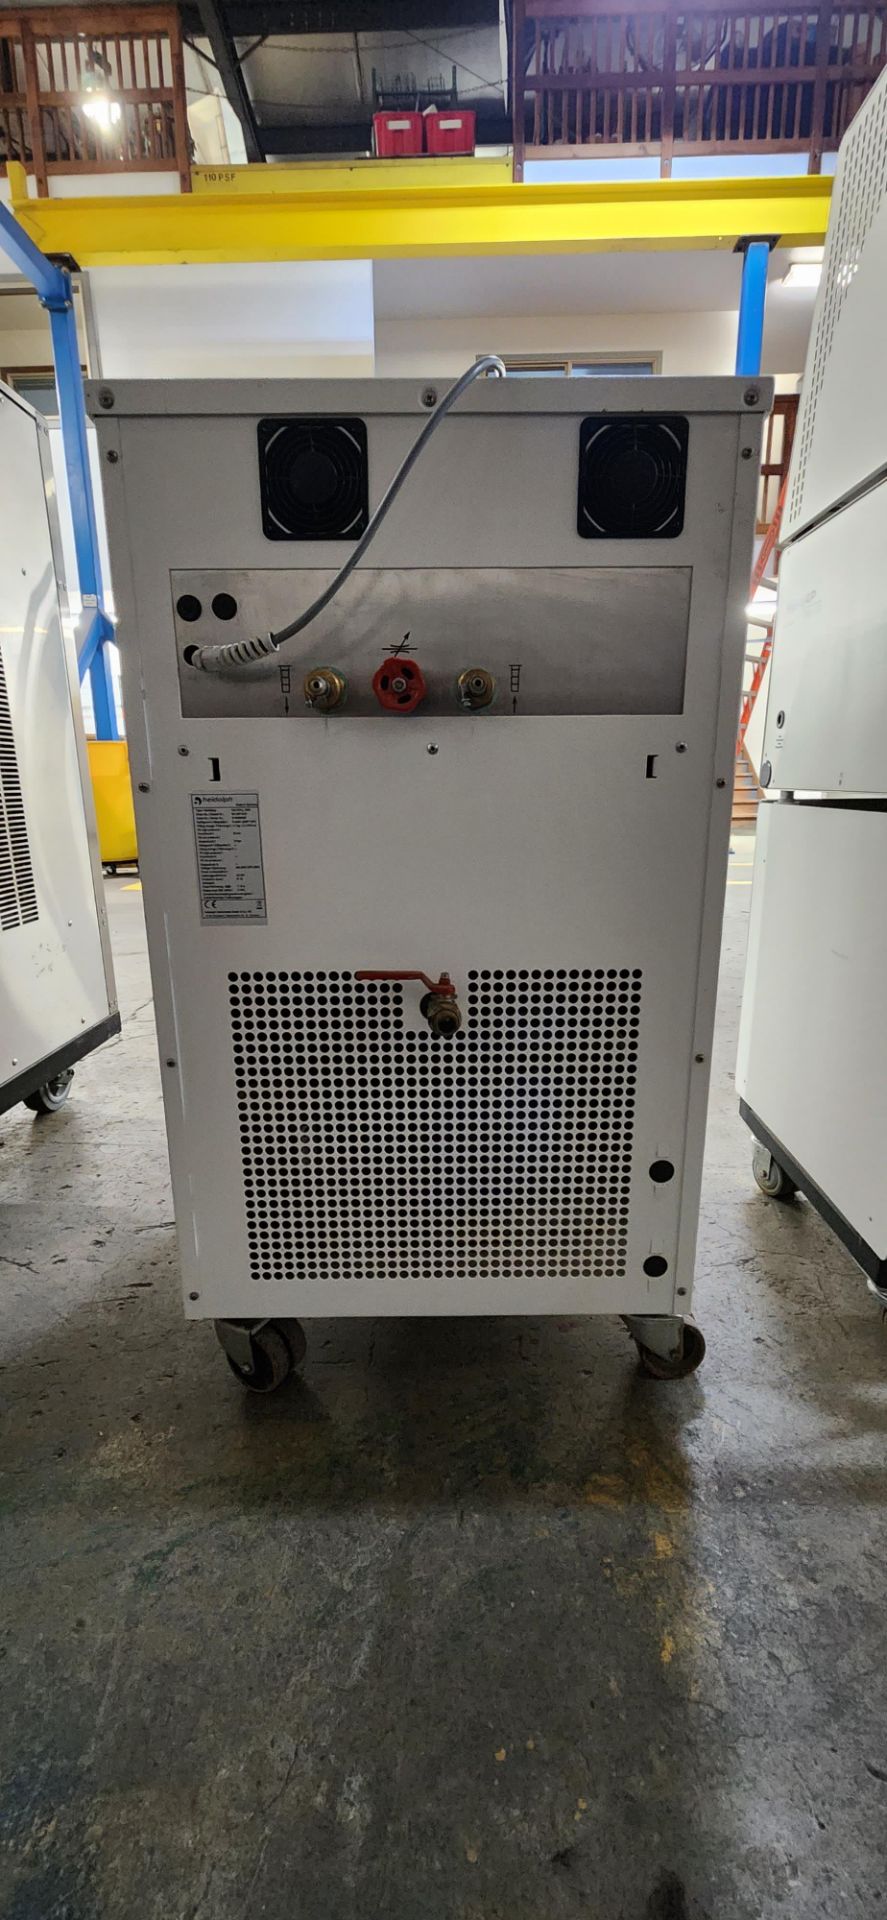 Used HBX Industrial S with A1C Glassware, RotaVac20 Pump, VC5000 Chiller. Model Hei-VAP Industrial - Image 5 of 6